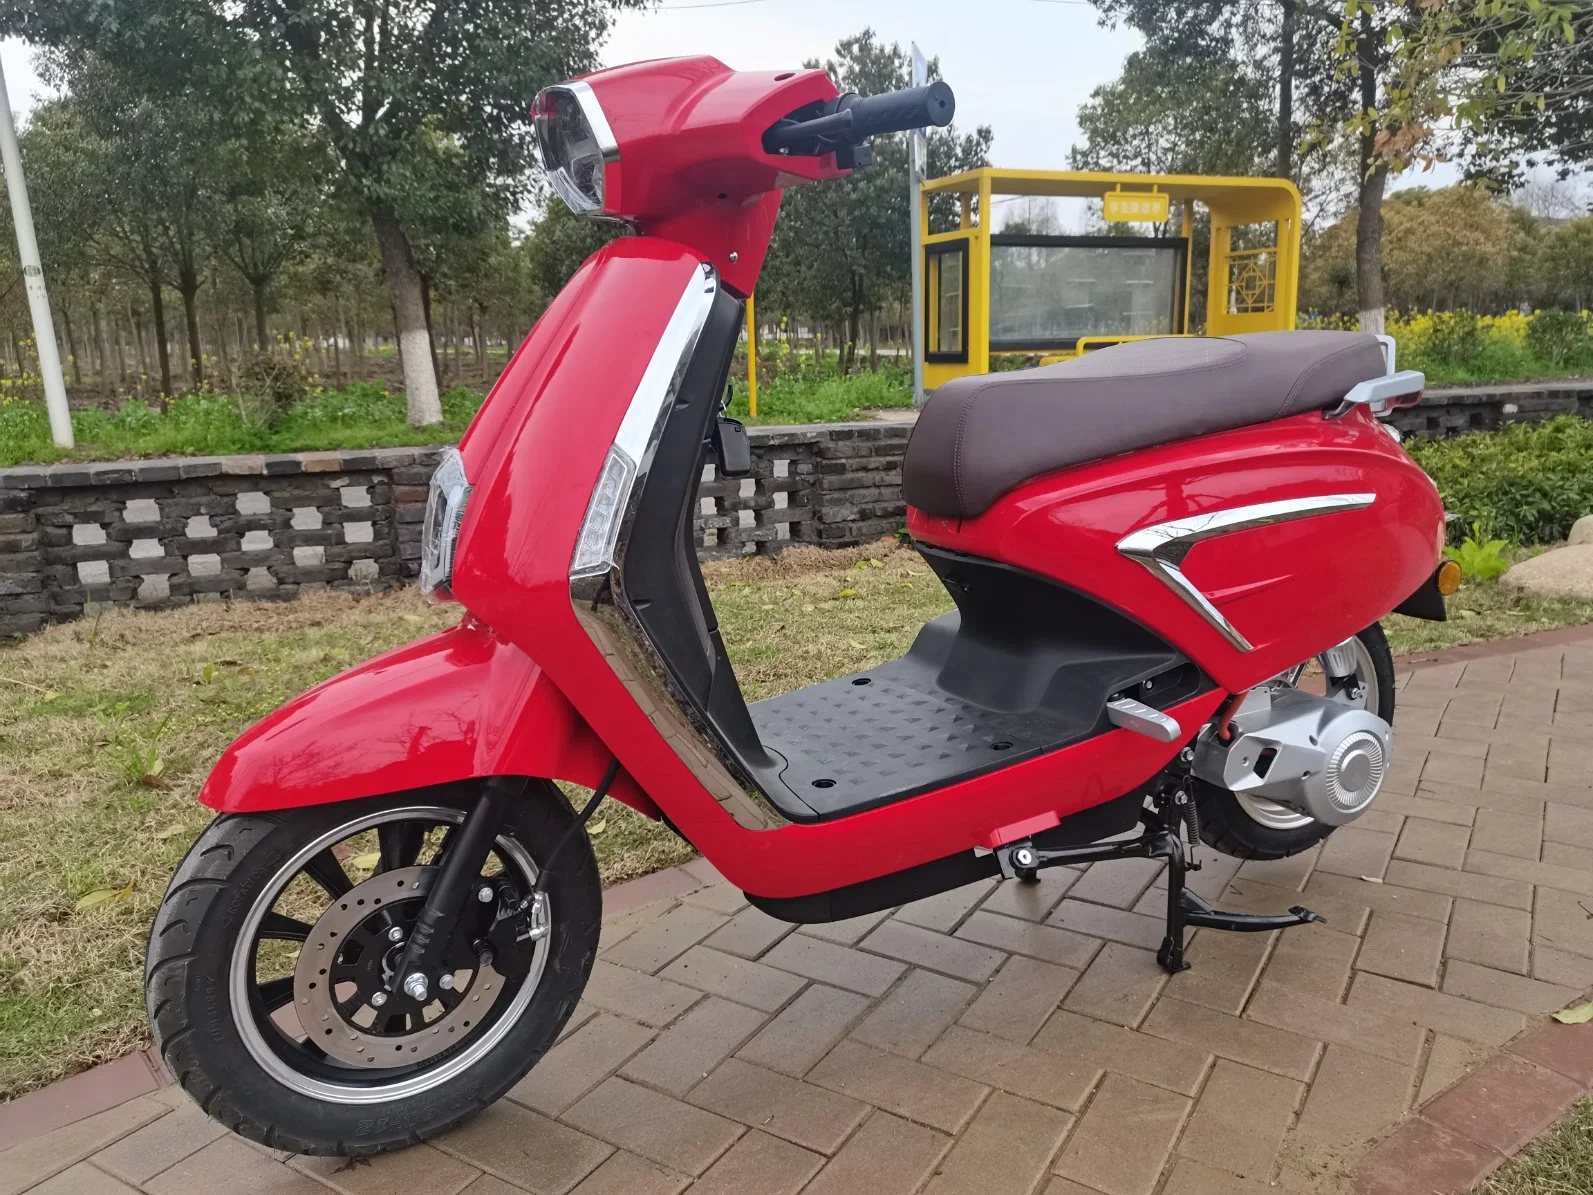 The Cheapest and High Quality Electric Motorcycle E Bike Scooter for Sale and 2000W 80km/H